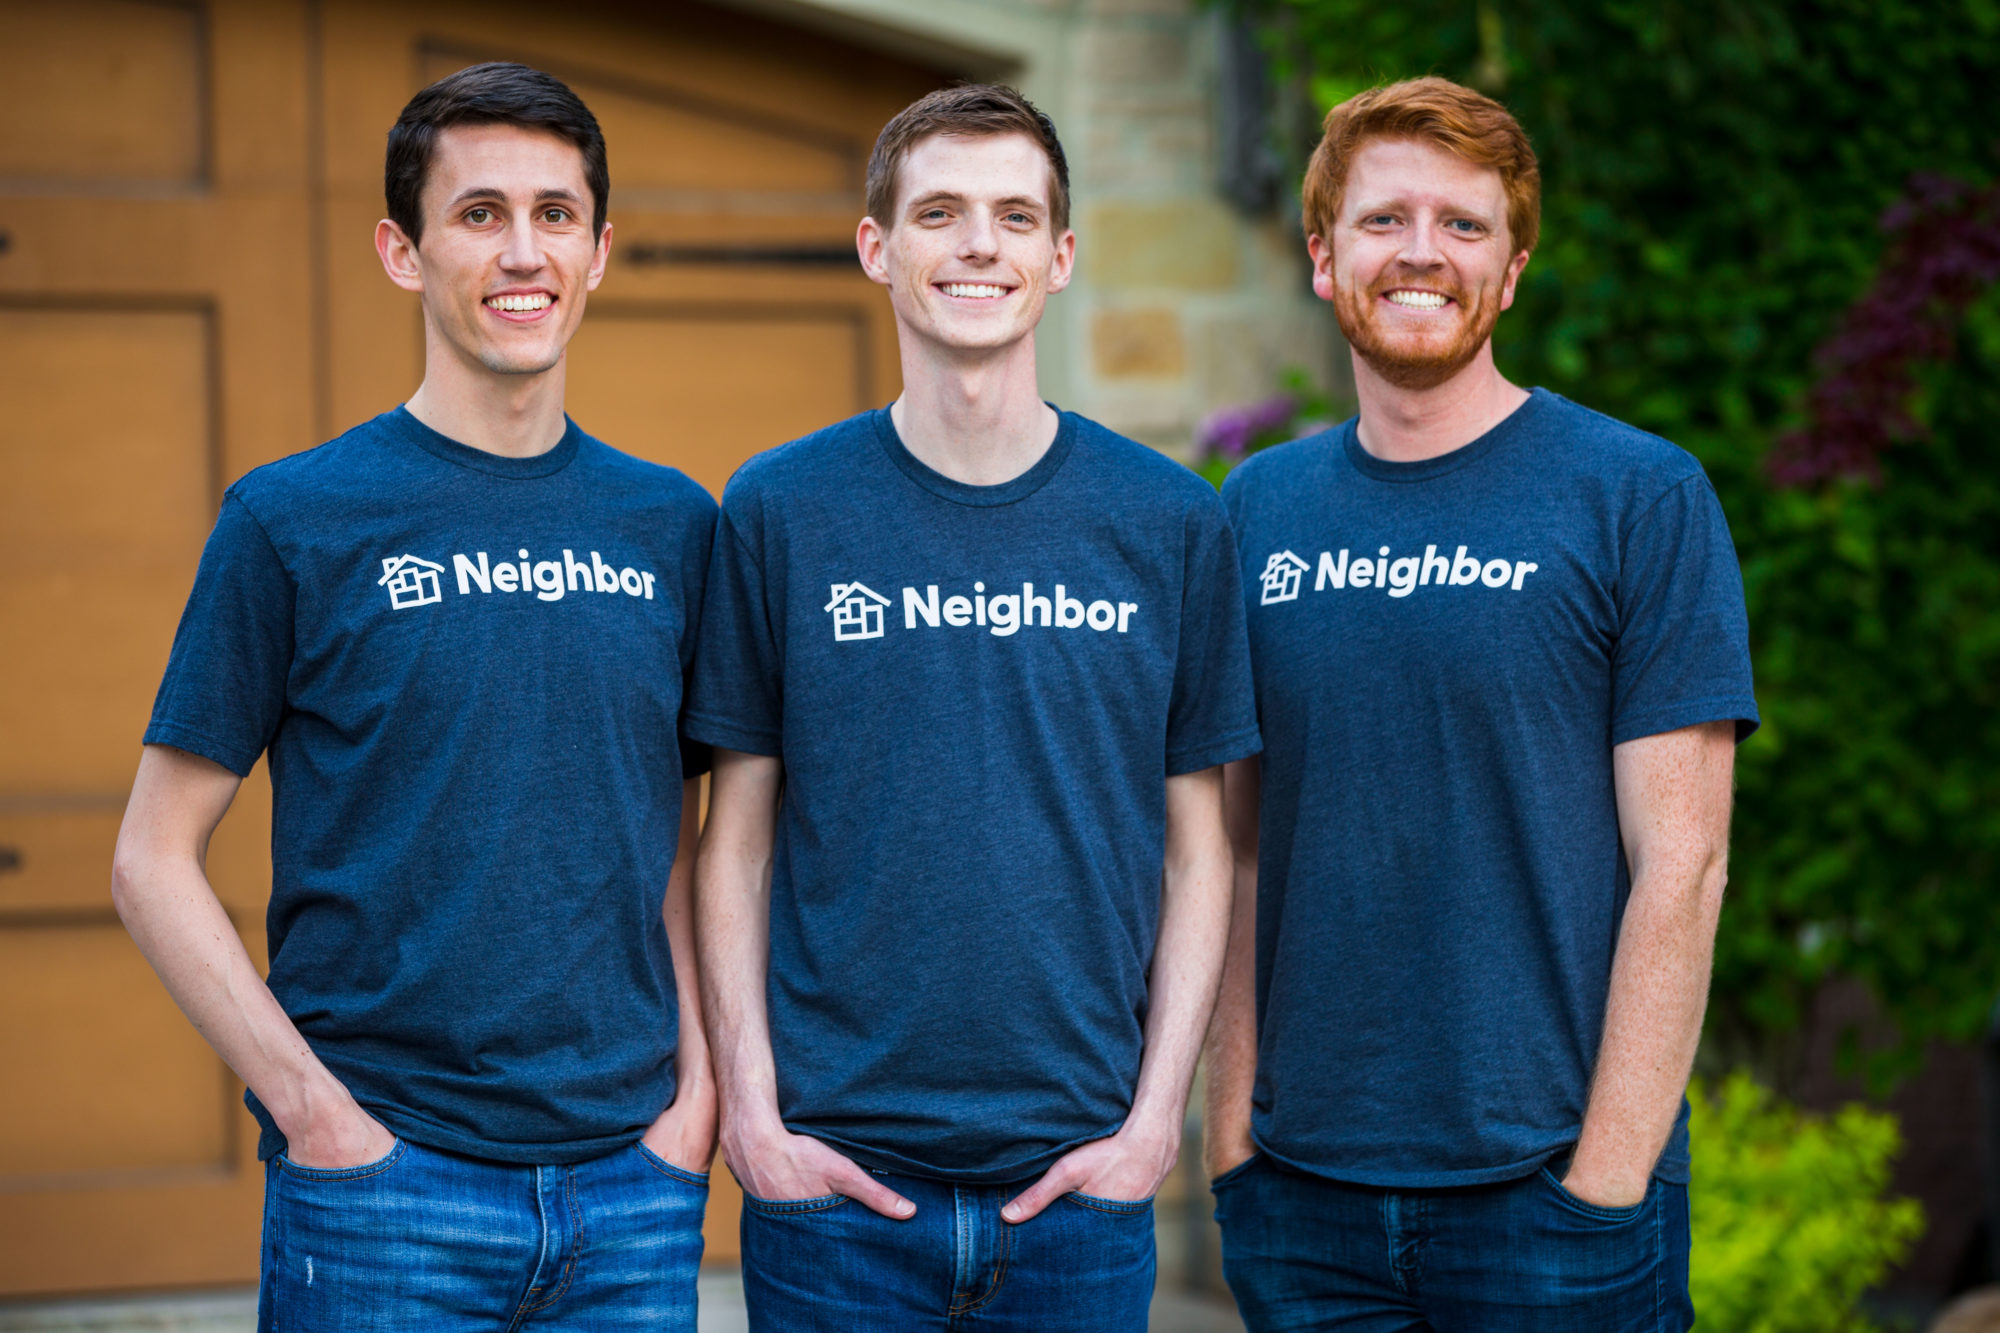 In the December edition of the Founder Series, Joseph Woodbury of Neighbor shares the story of how he co-founded Neighbor.com.